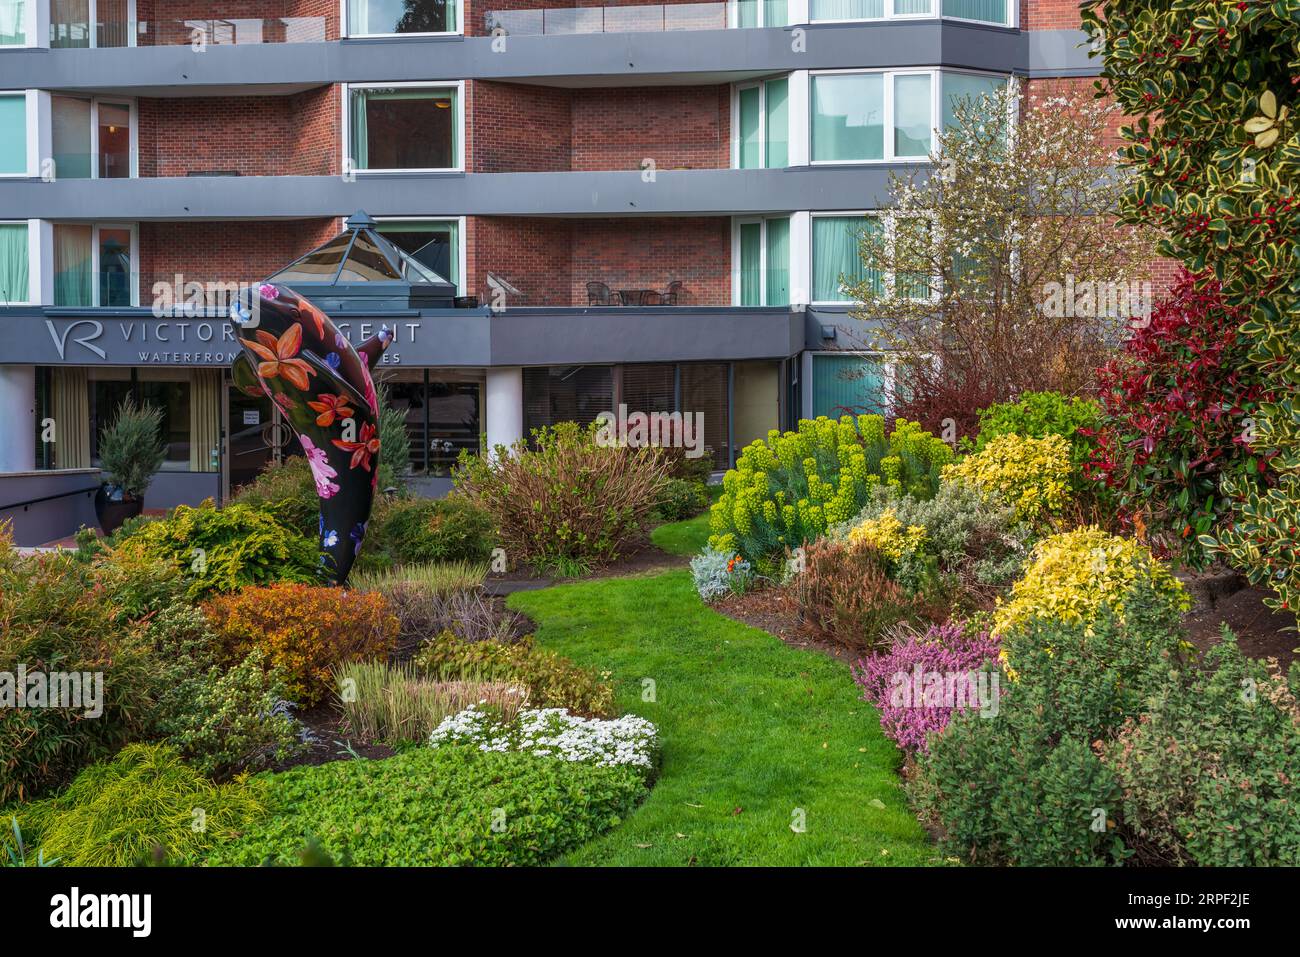 A small garden in front of the victoria Regent Hotel on the waterfront of Victoria, Vancouver Island, British Columbia, Canada. Stock Photo